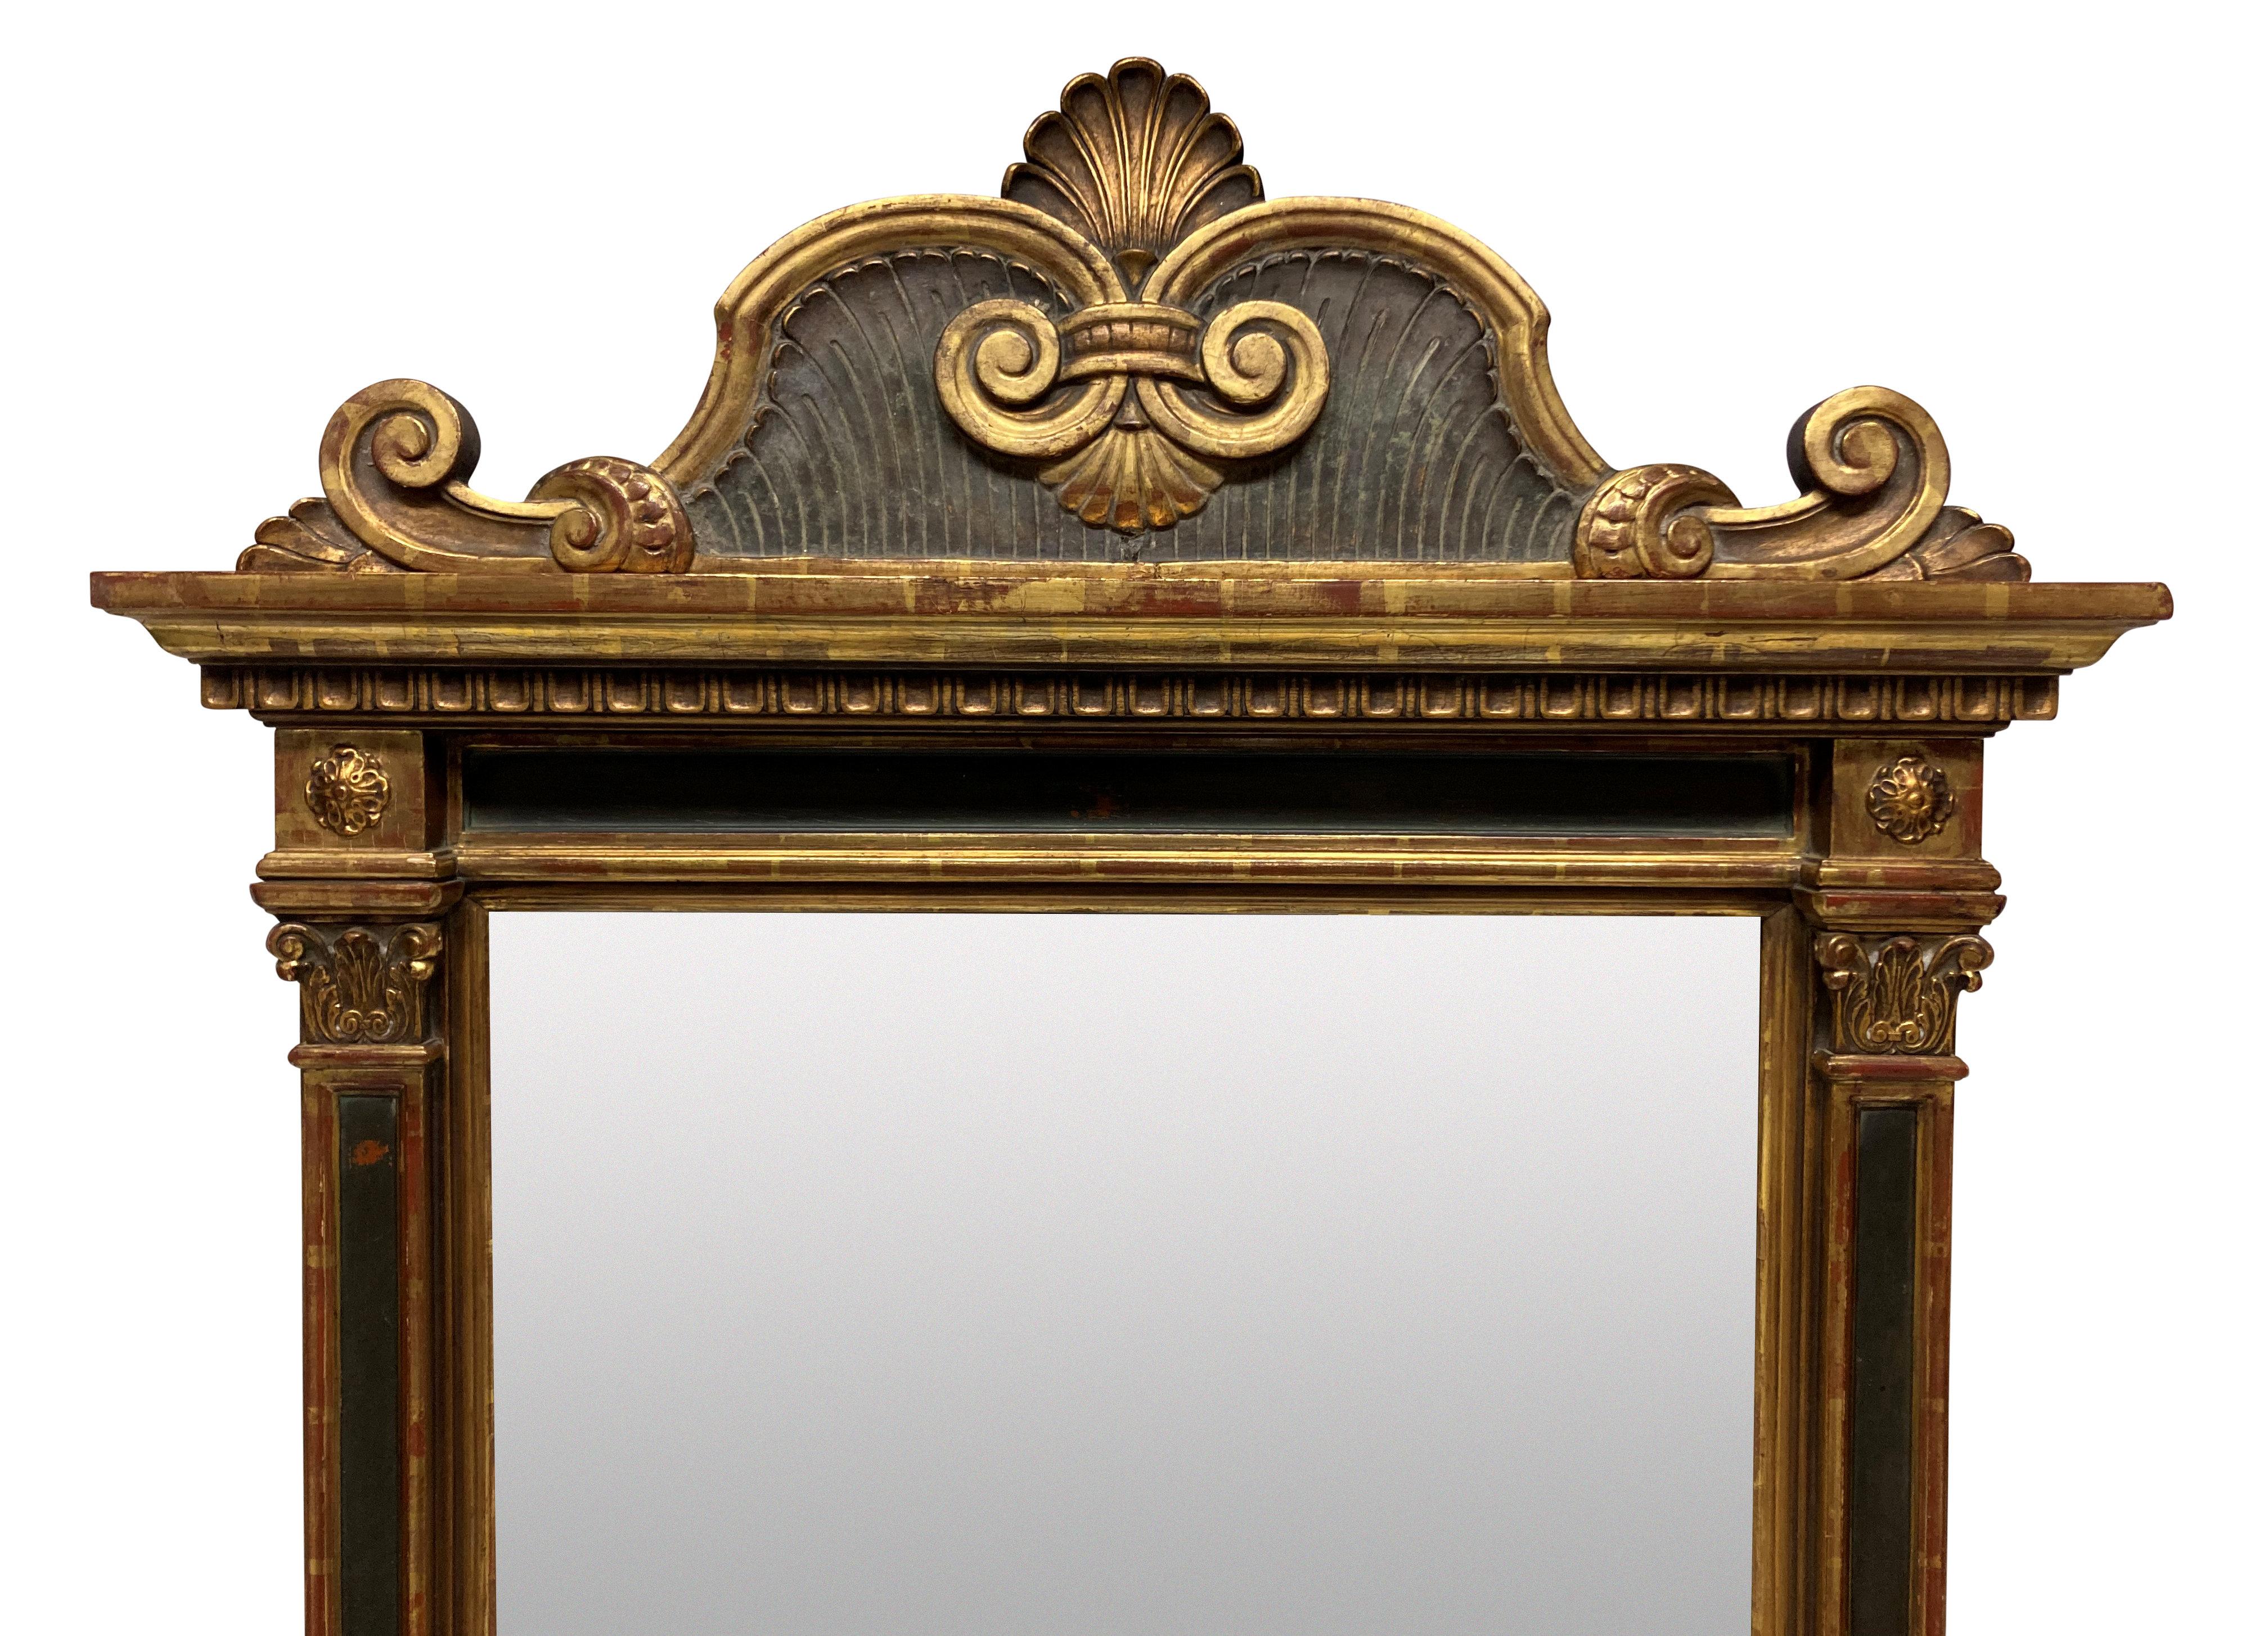 A large Italian giltwood mirror in the style of a Renaissance tabernacle. Pedimented, with its original gilding and paintwork throughout. It has an old mirror plate with minor loses in places. This mirror is very heavy and has a deep stepped base,